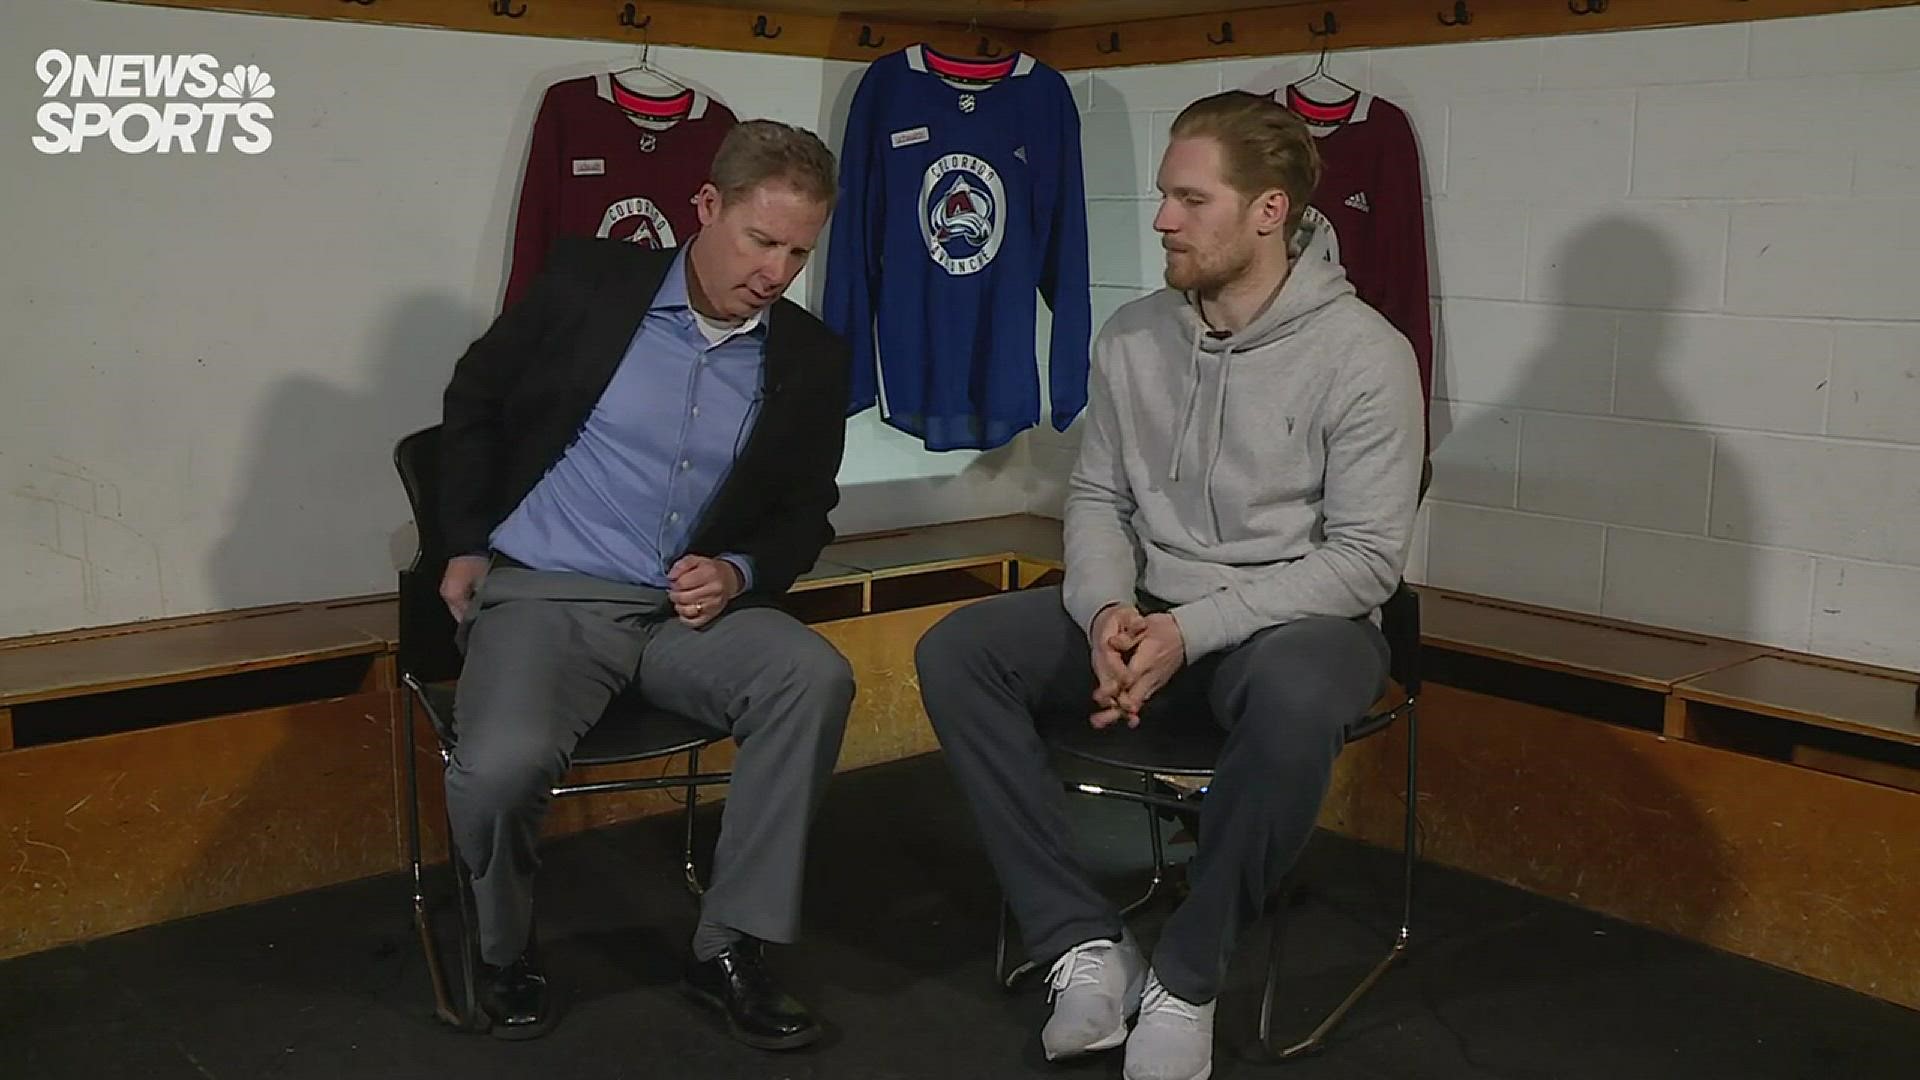 Avalanche captain Gabriel Landeskog sat down with 9NEWS to talk about the All-Star break and Colorado's play heading into the break.